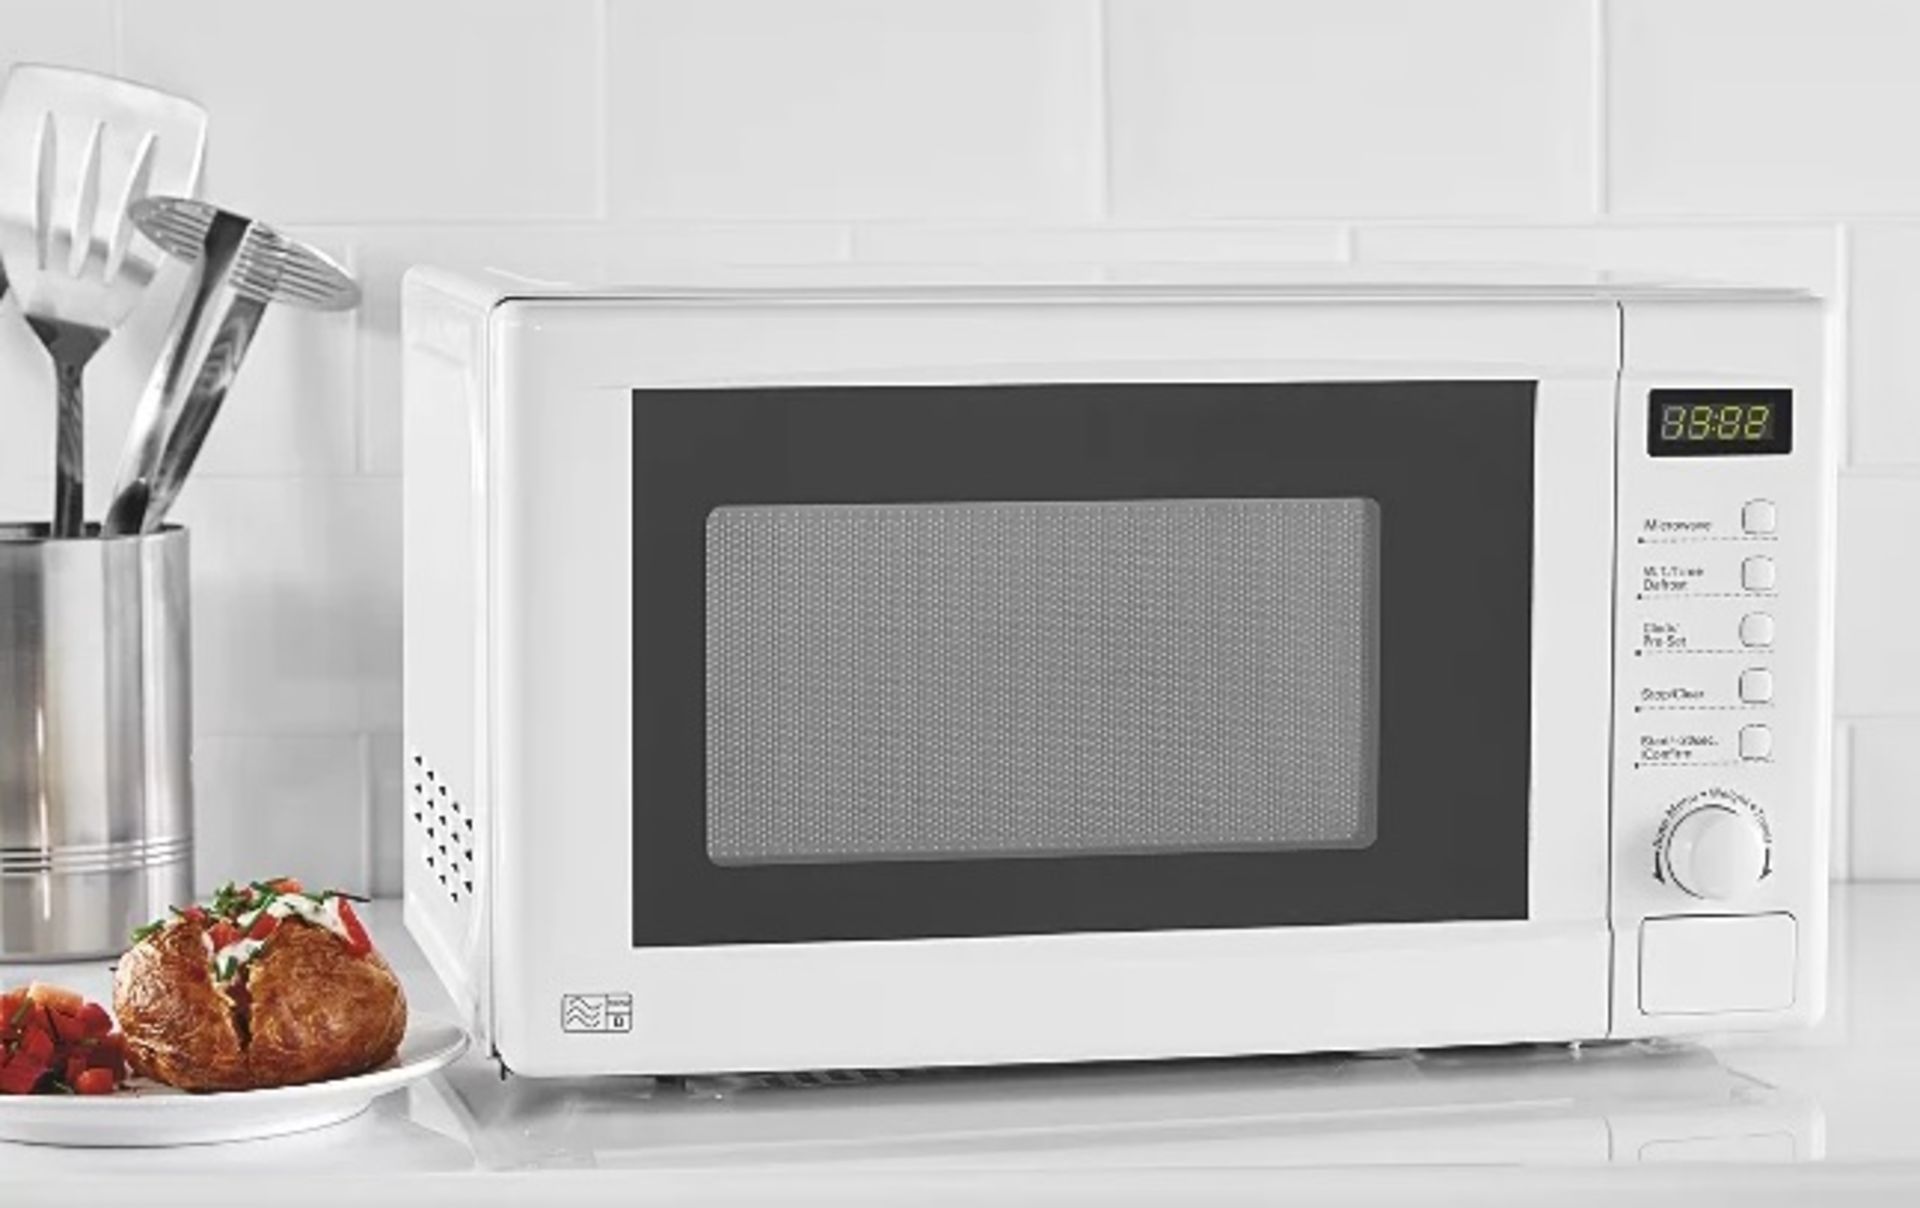 (R6E) Kitchen. 1 X 700W Microwave Oven White (Model GDM301W-16) (Clean, Appears New)